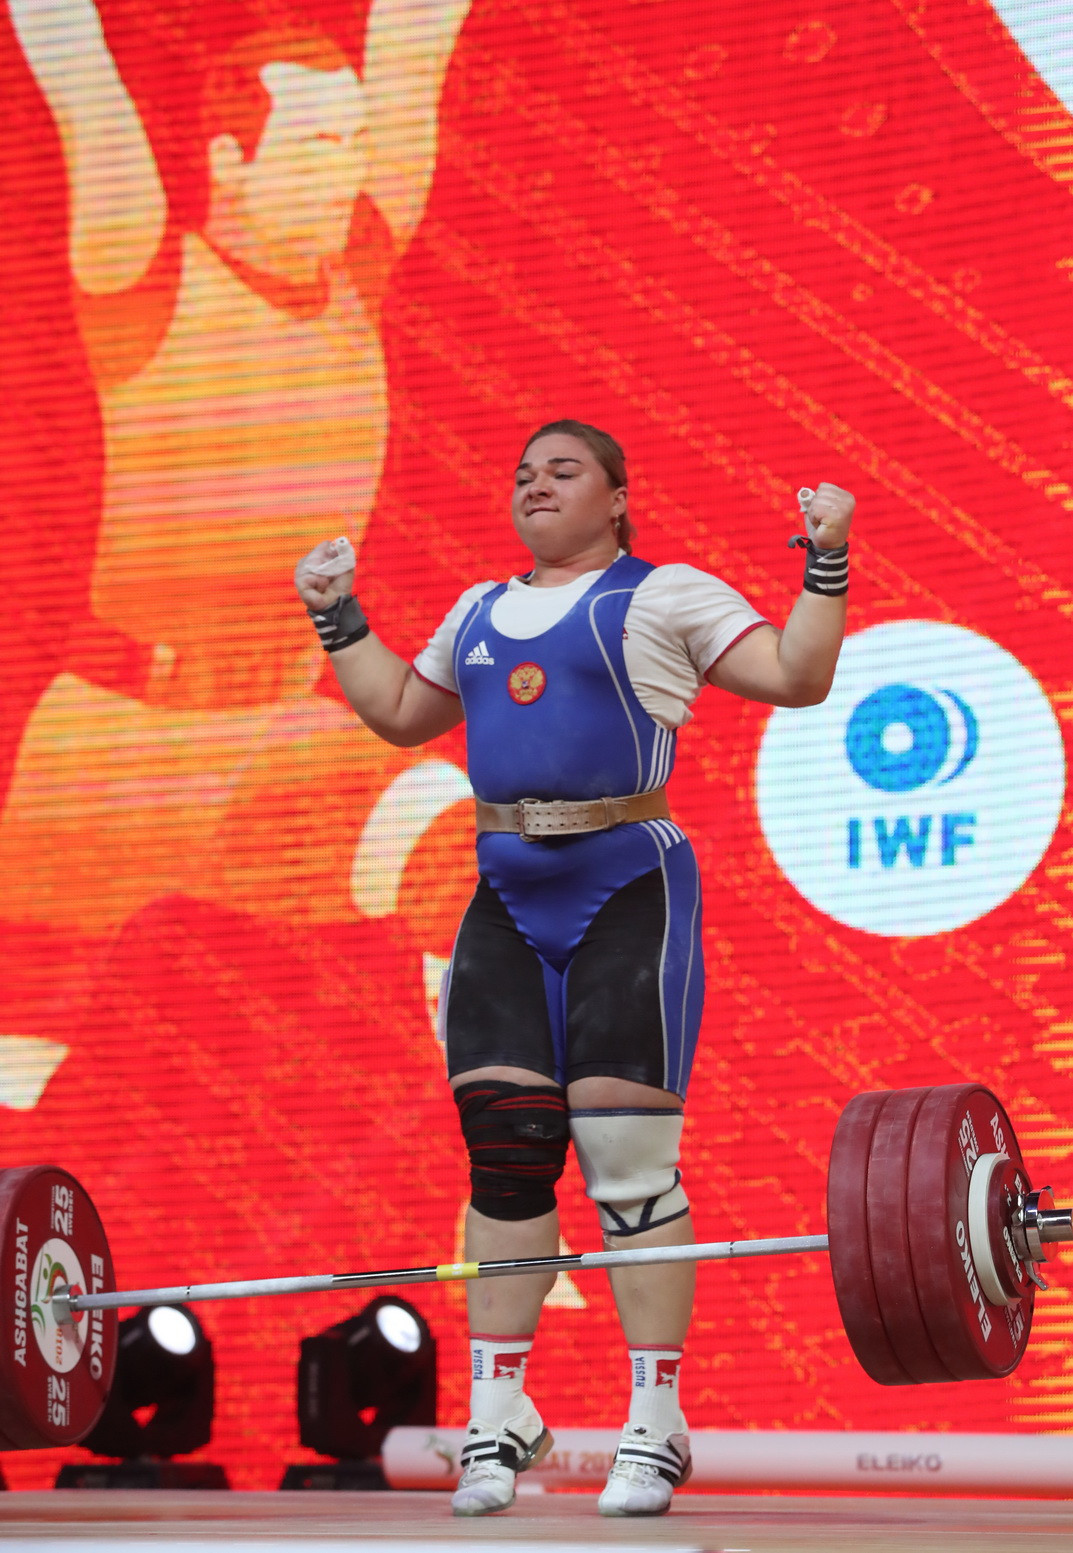 Russia’s Tatiana Kashirina claimed a clean sweep of the women’s over-87 kilograms gold medals on the final day of the 2018 International Weightlifting Federation (IWF) World Championships in Turkmenistan’s capital Ashgabat ©IWF